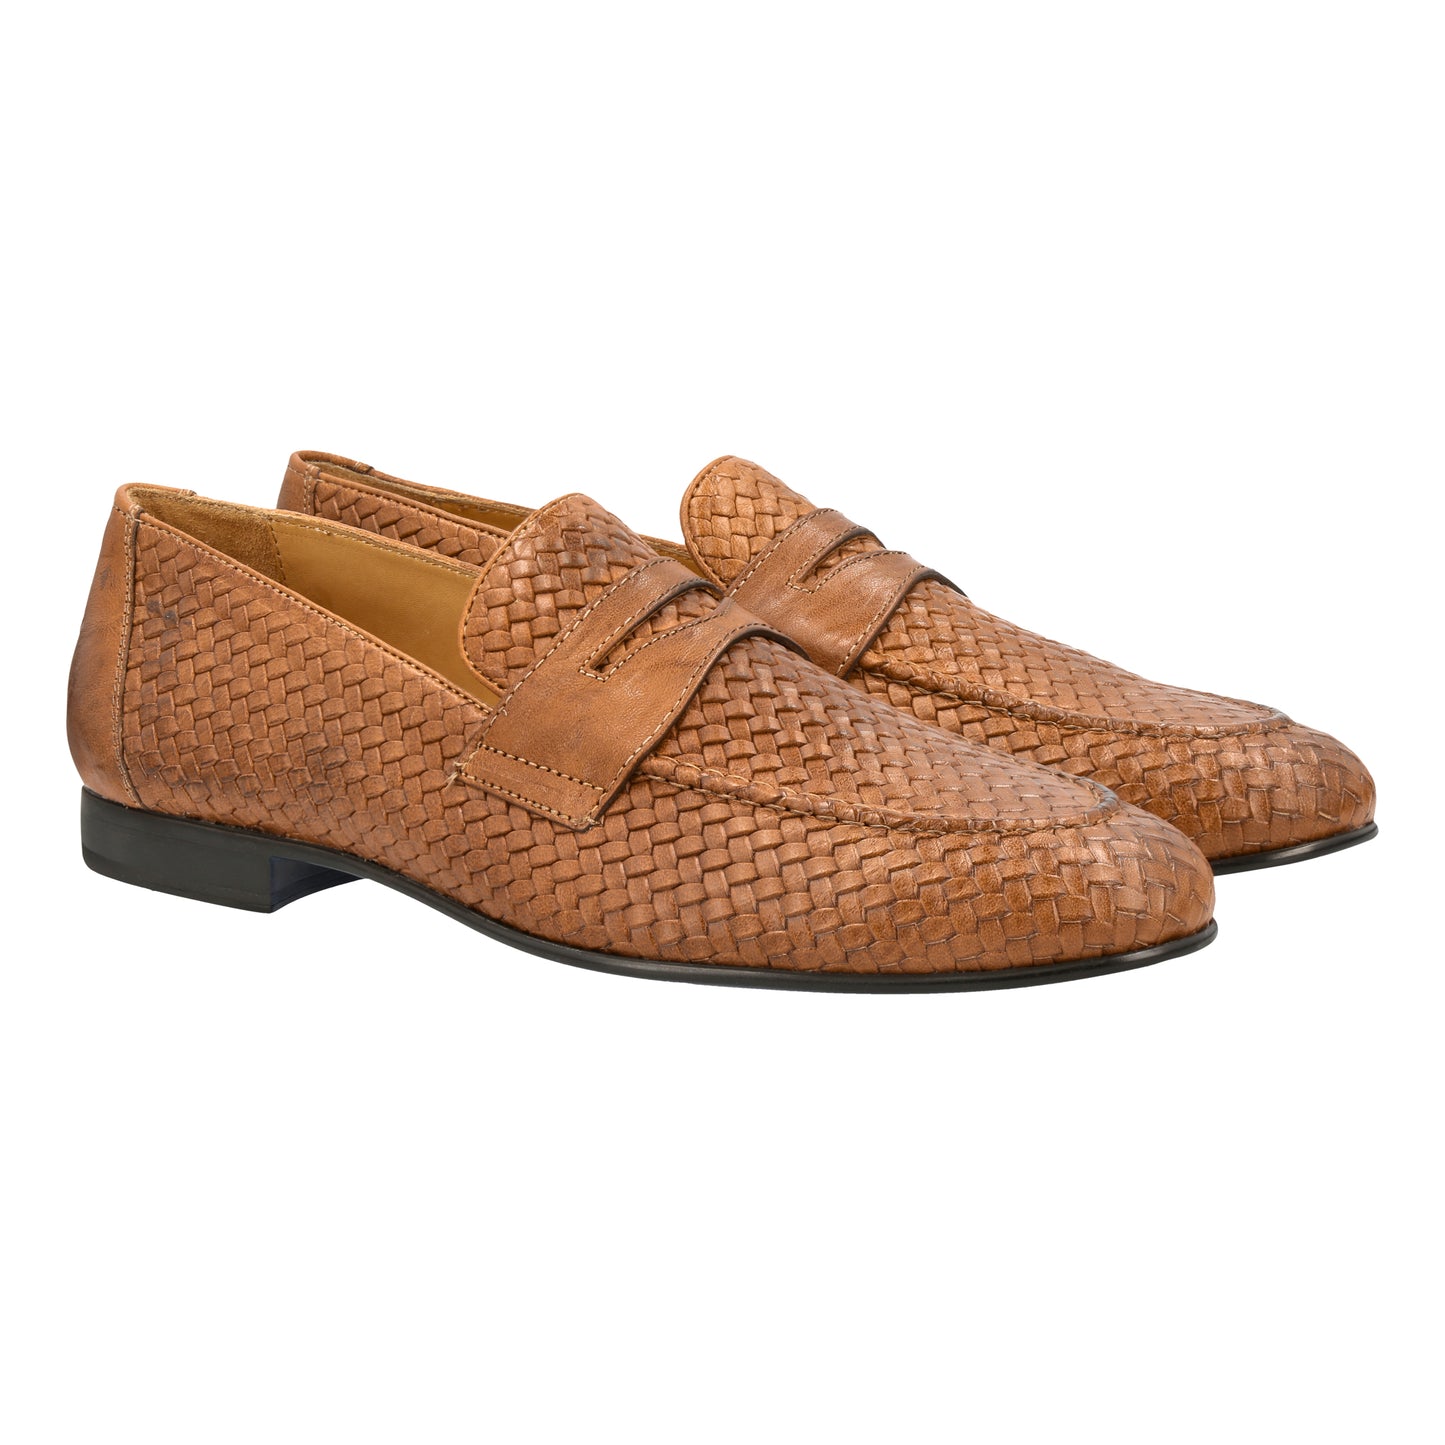 Braided Loafer "Toscana" Brown Calf